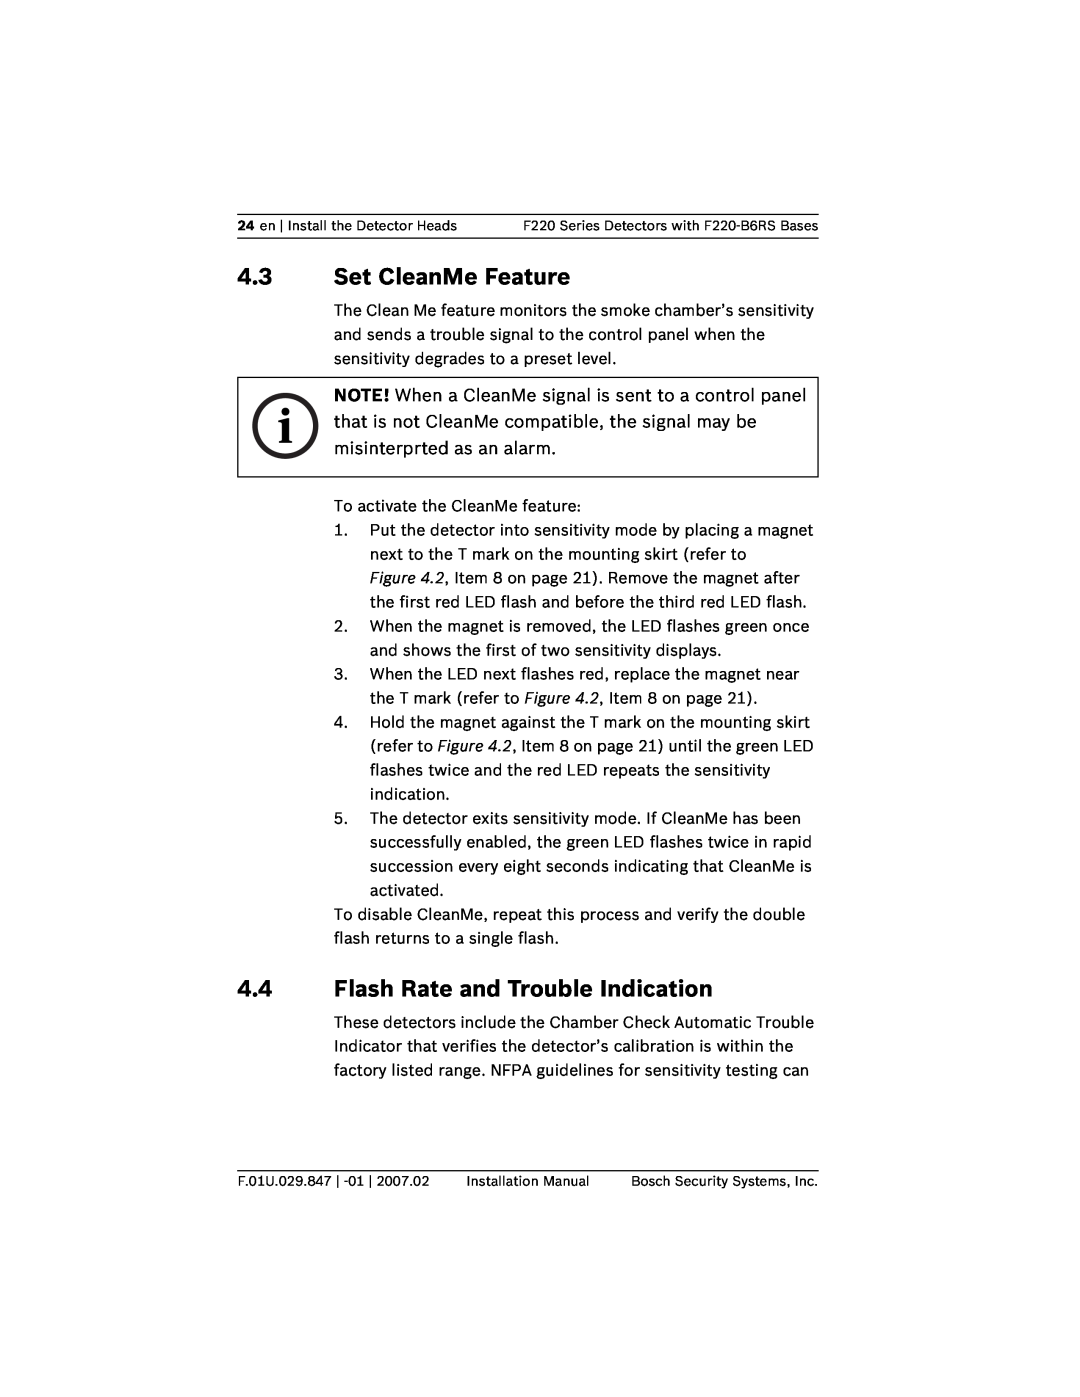 Bosch Appliances F220-B6RS installation manual 4.3Set CleanMe Feature, 4.4Flash Rate and Trouble Indication 